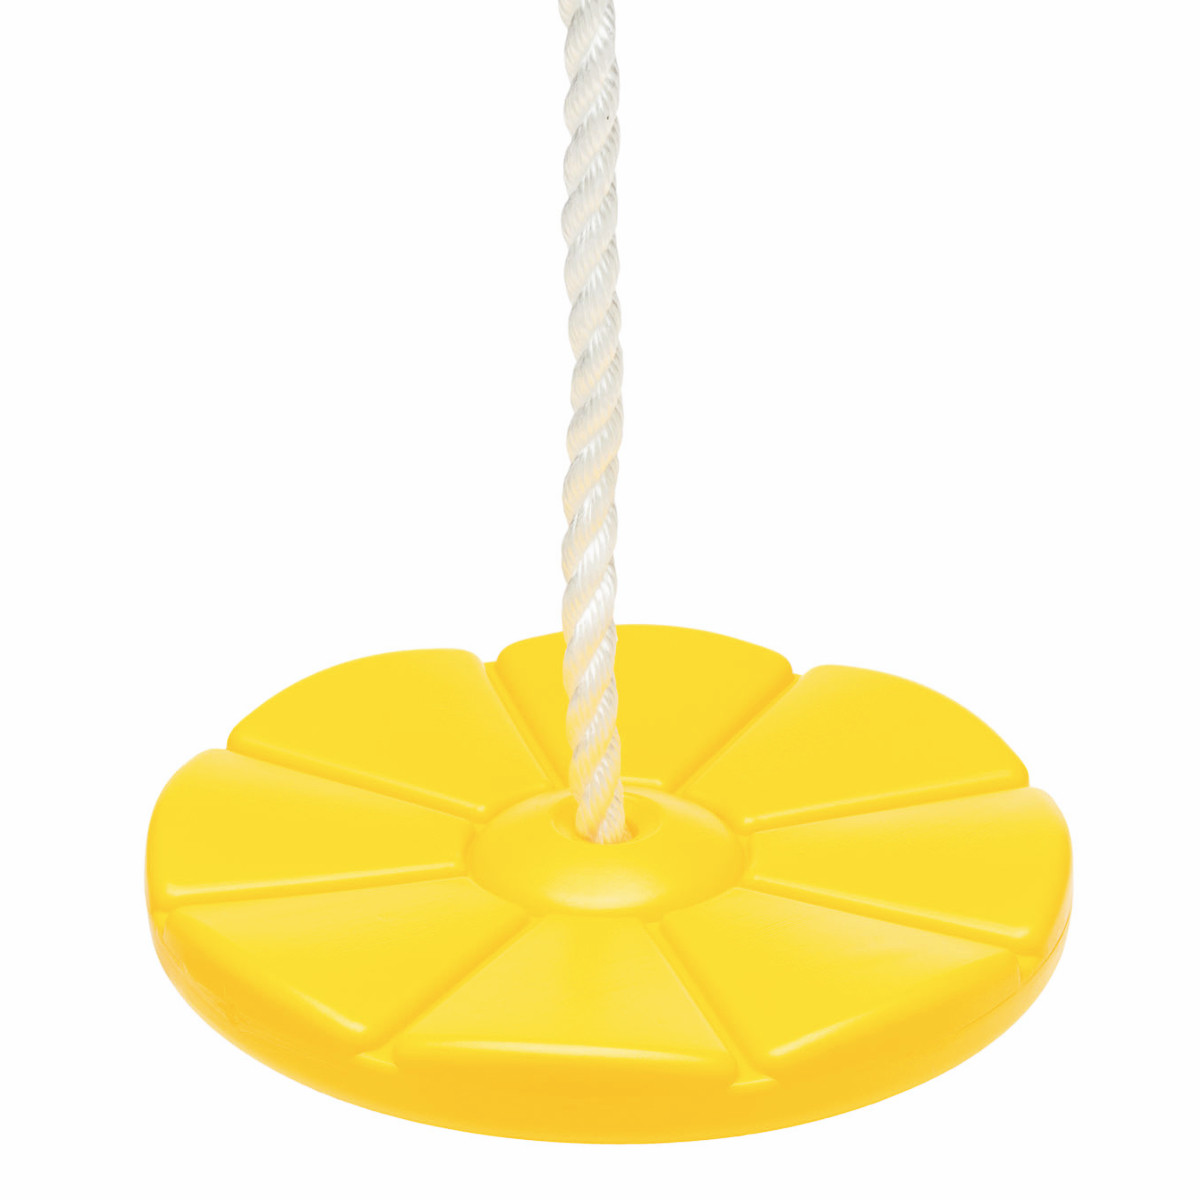 Brand New Daisy Disc Swing Seat YELLOW PlaySet Playground With Adjustable Rope 